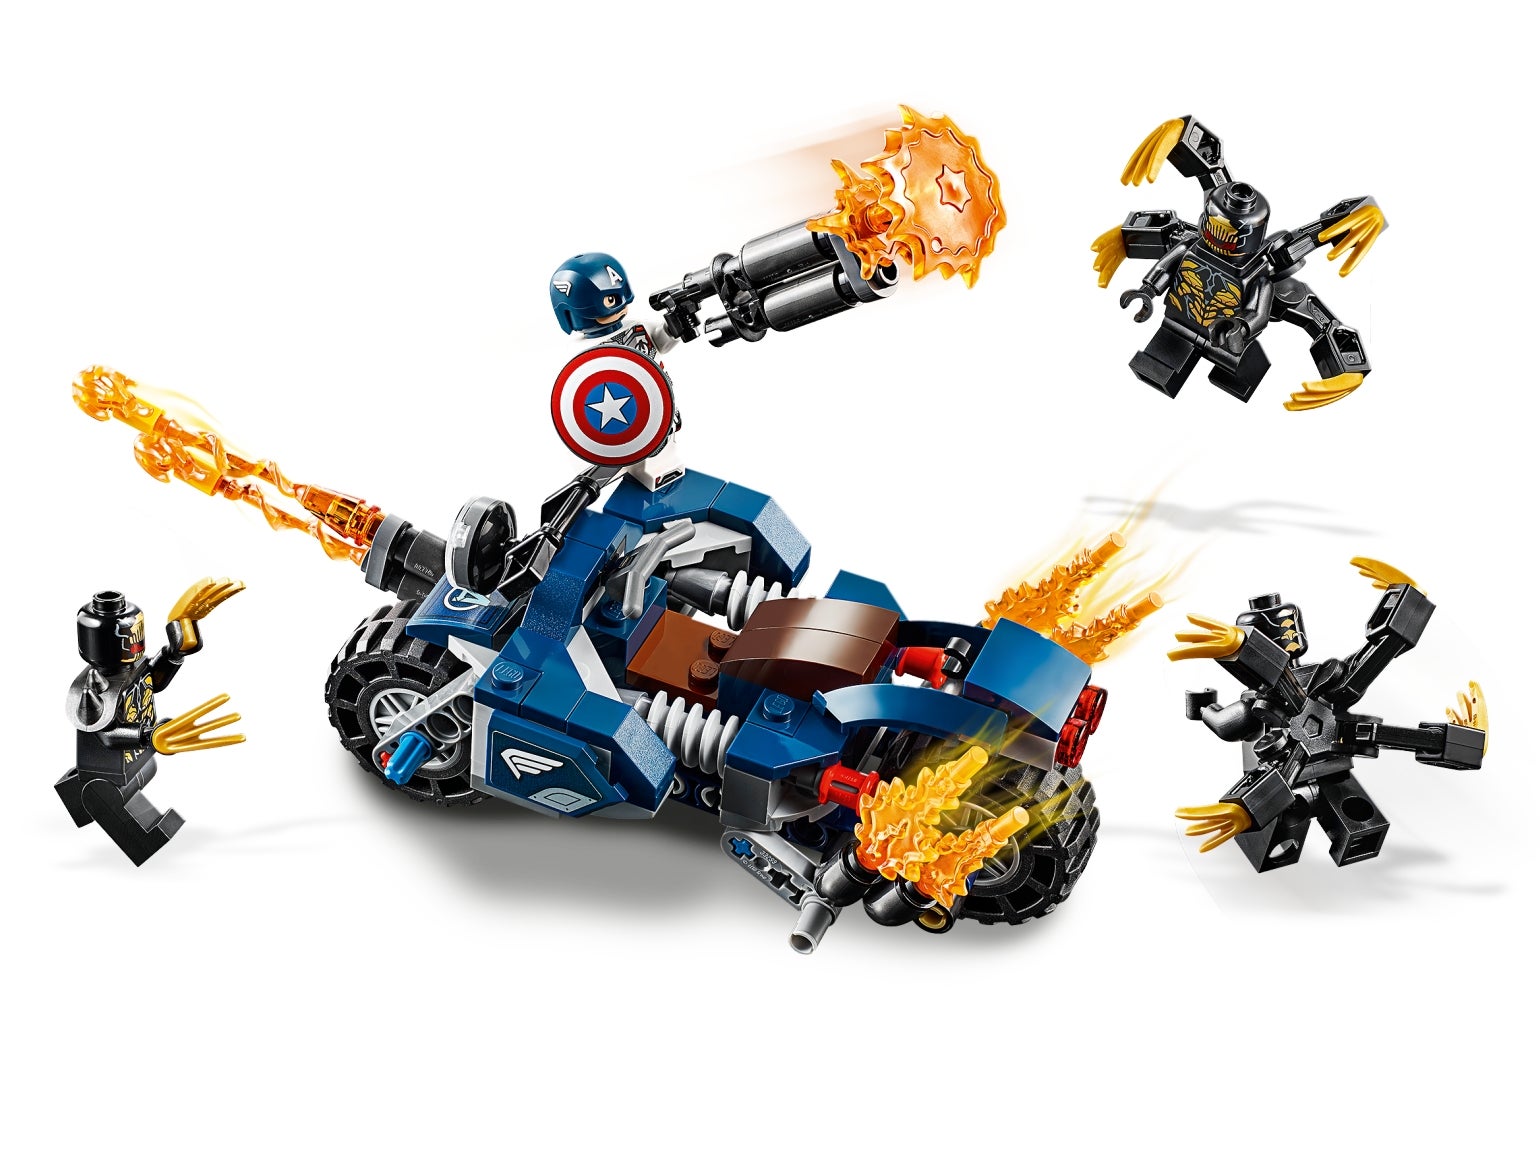 76123 Outriders Attack Super Heroes LEGO Captain America for sale online